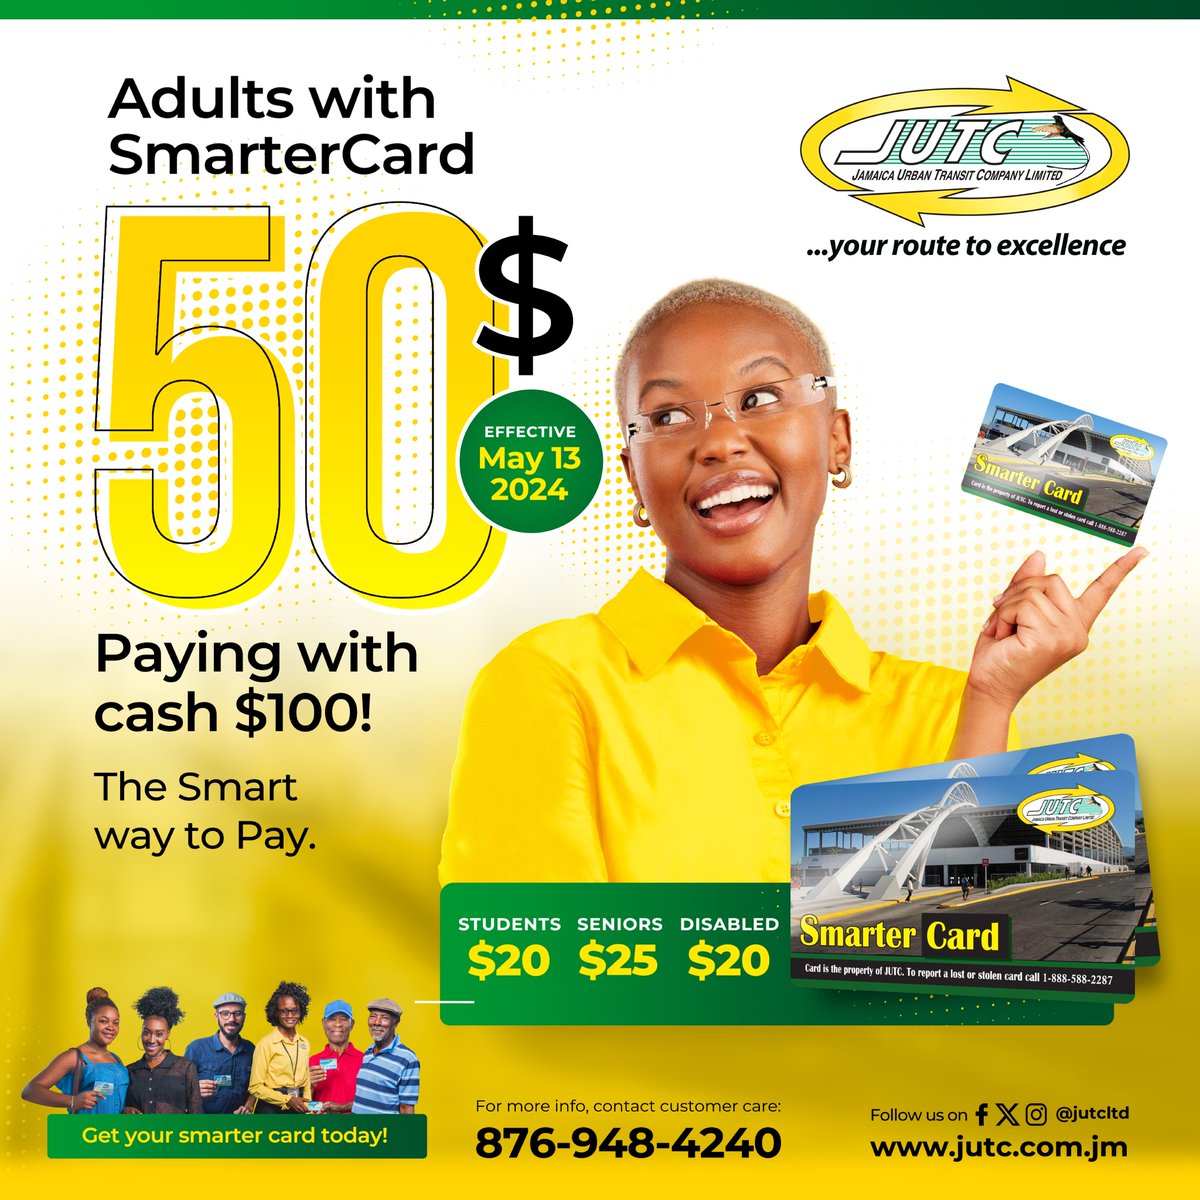 🚍🎉 Quick Reminder 📢 JUTC fares are now slashed to just $50 with a SmarterCard! And, don't forget, you'll bag 3 FREE RIDES with your first top-up until May 31, 2024. From May 13, adult commuters without a JUTC SmarterCard will pay $100. 🌟 Other terms and conditions apply.